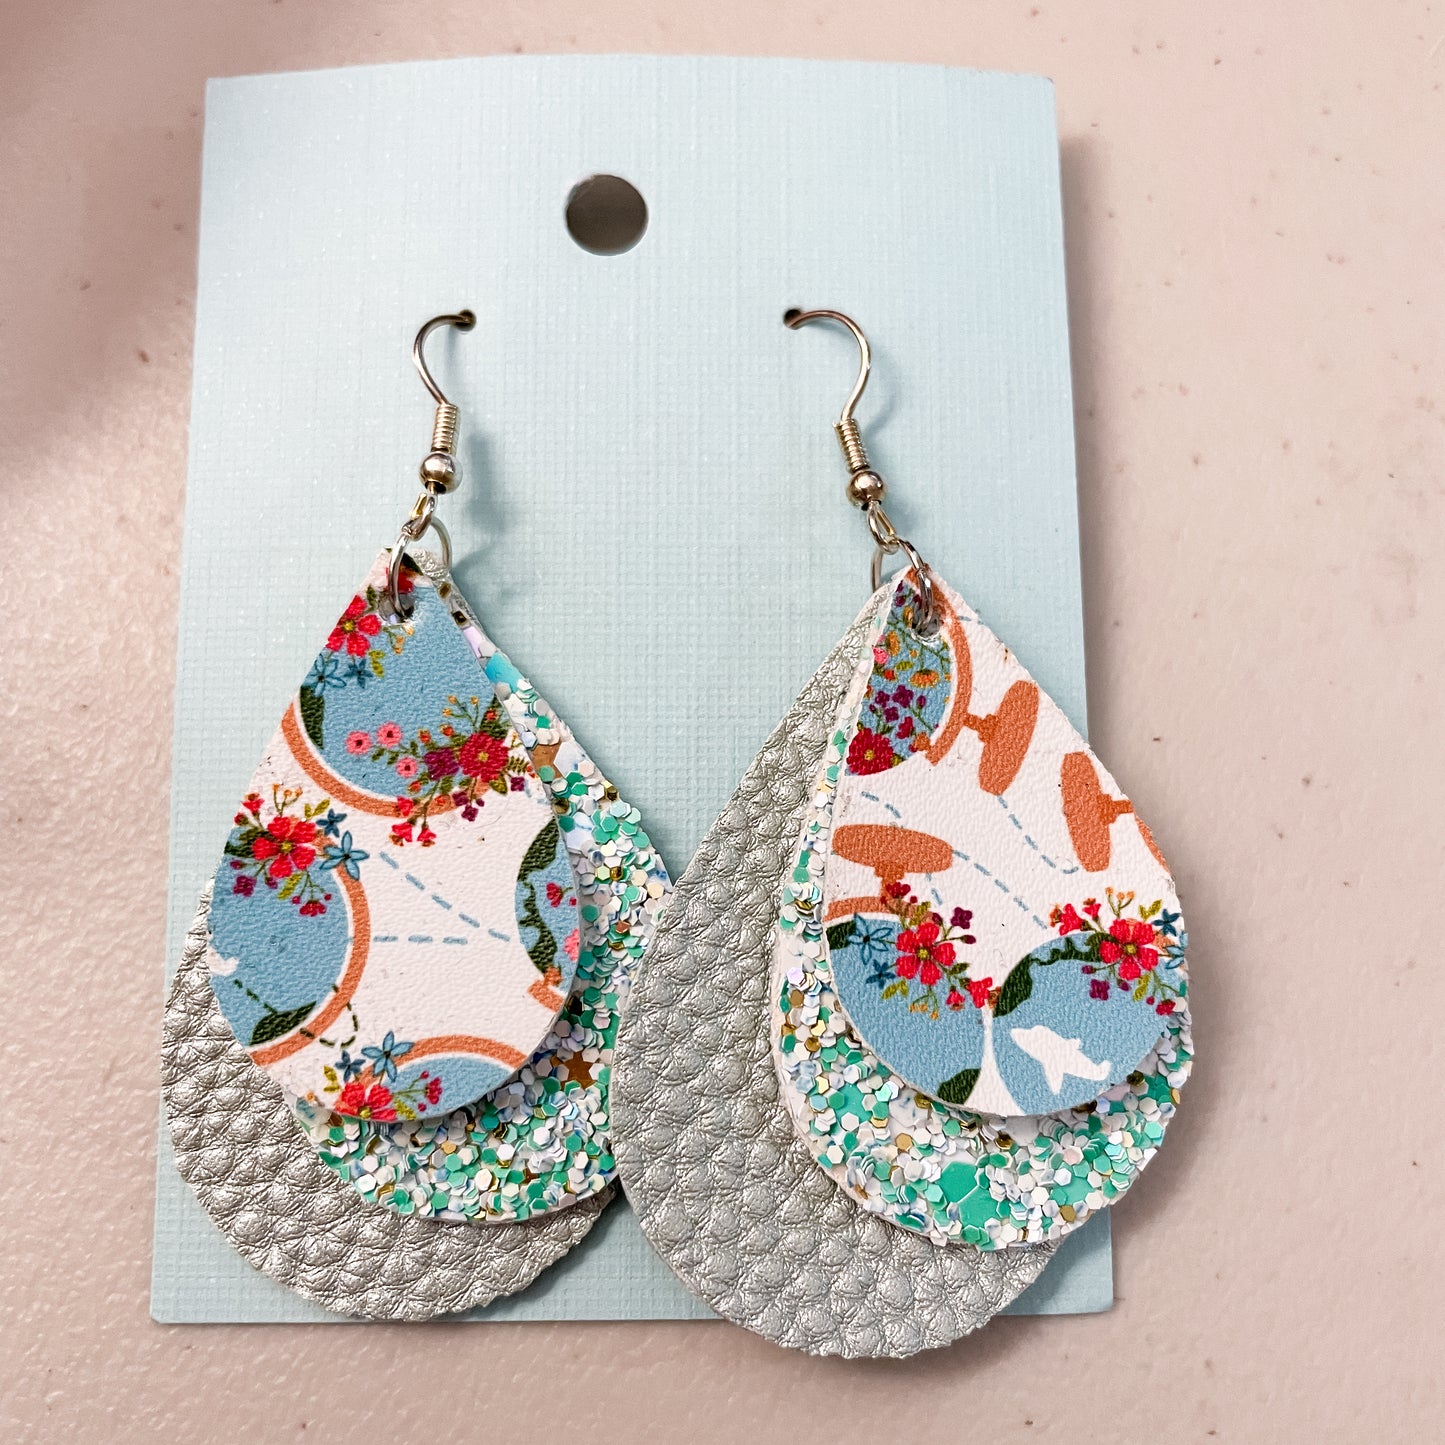 Travel the Globe Emily Style 3 Layer Dangle Earrings | Emily Style Dangle Earrings | Layered Teardrop Shape | Teal Floral Globes